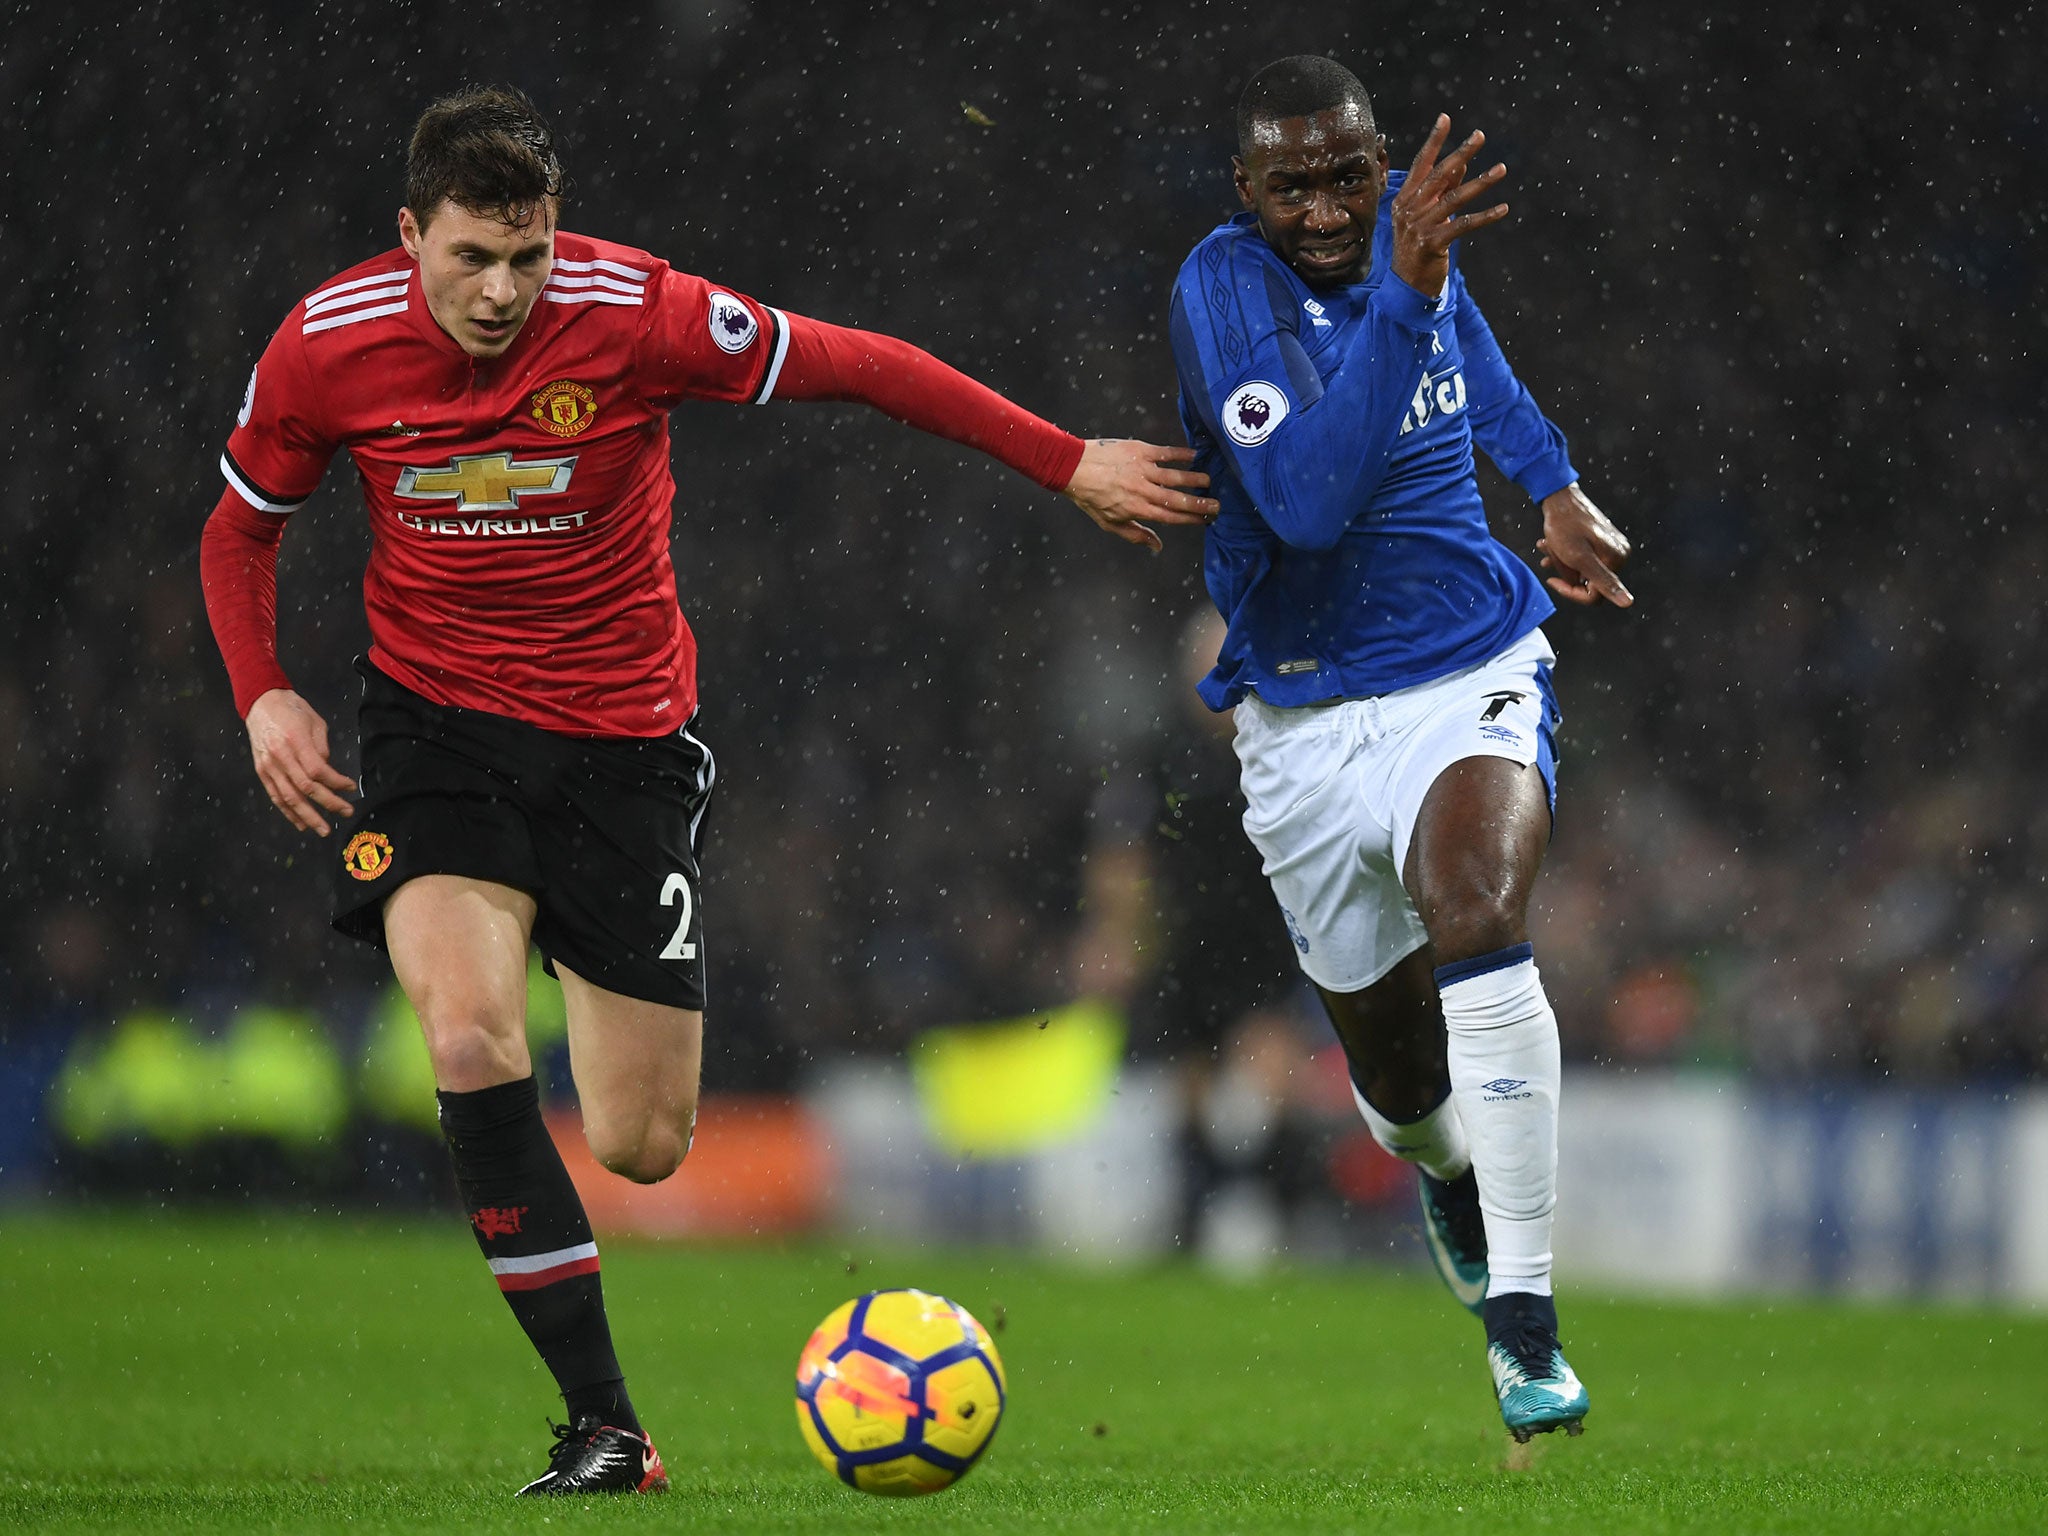 Yannick Bolasie gets the better of Victor Lindelof down the left flank